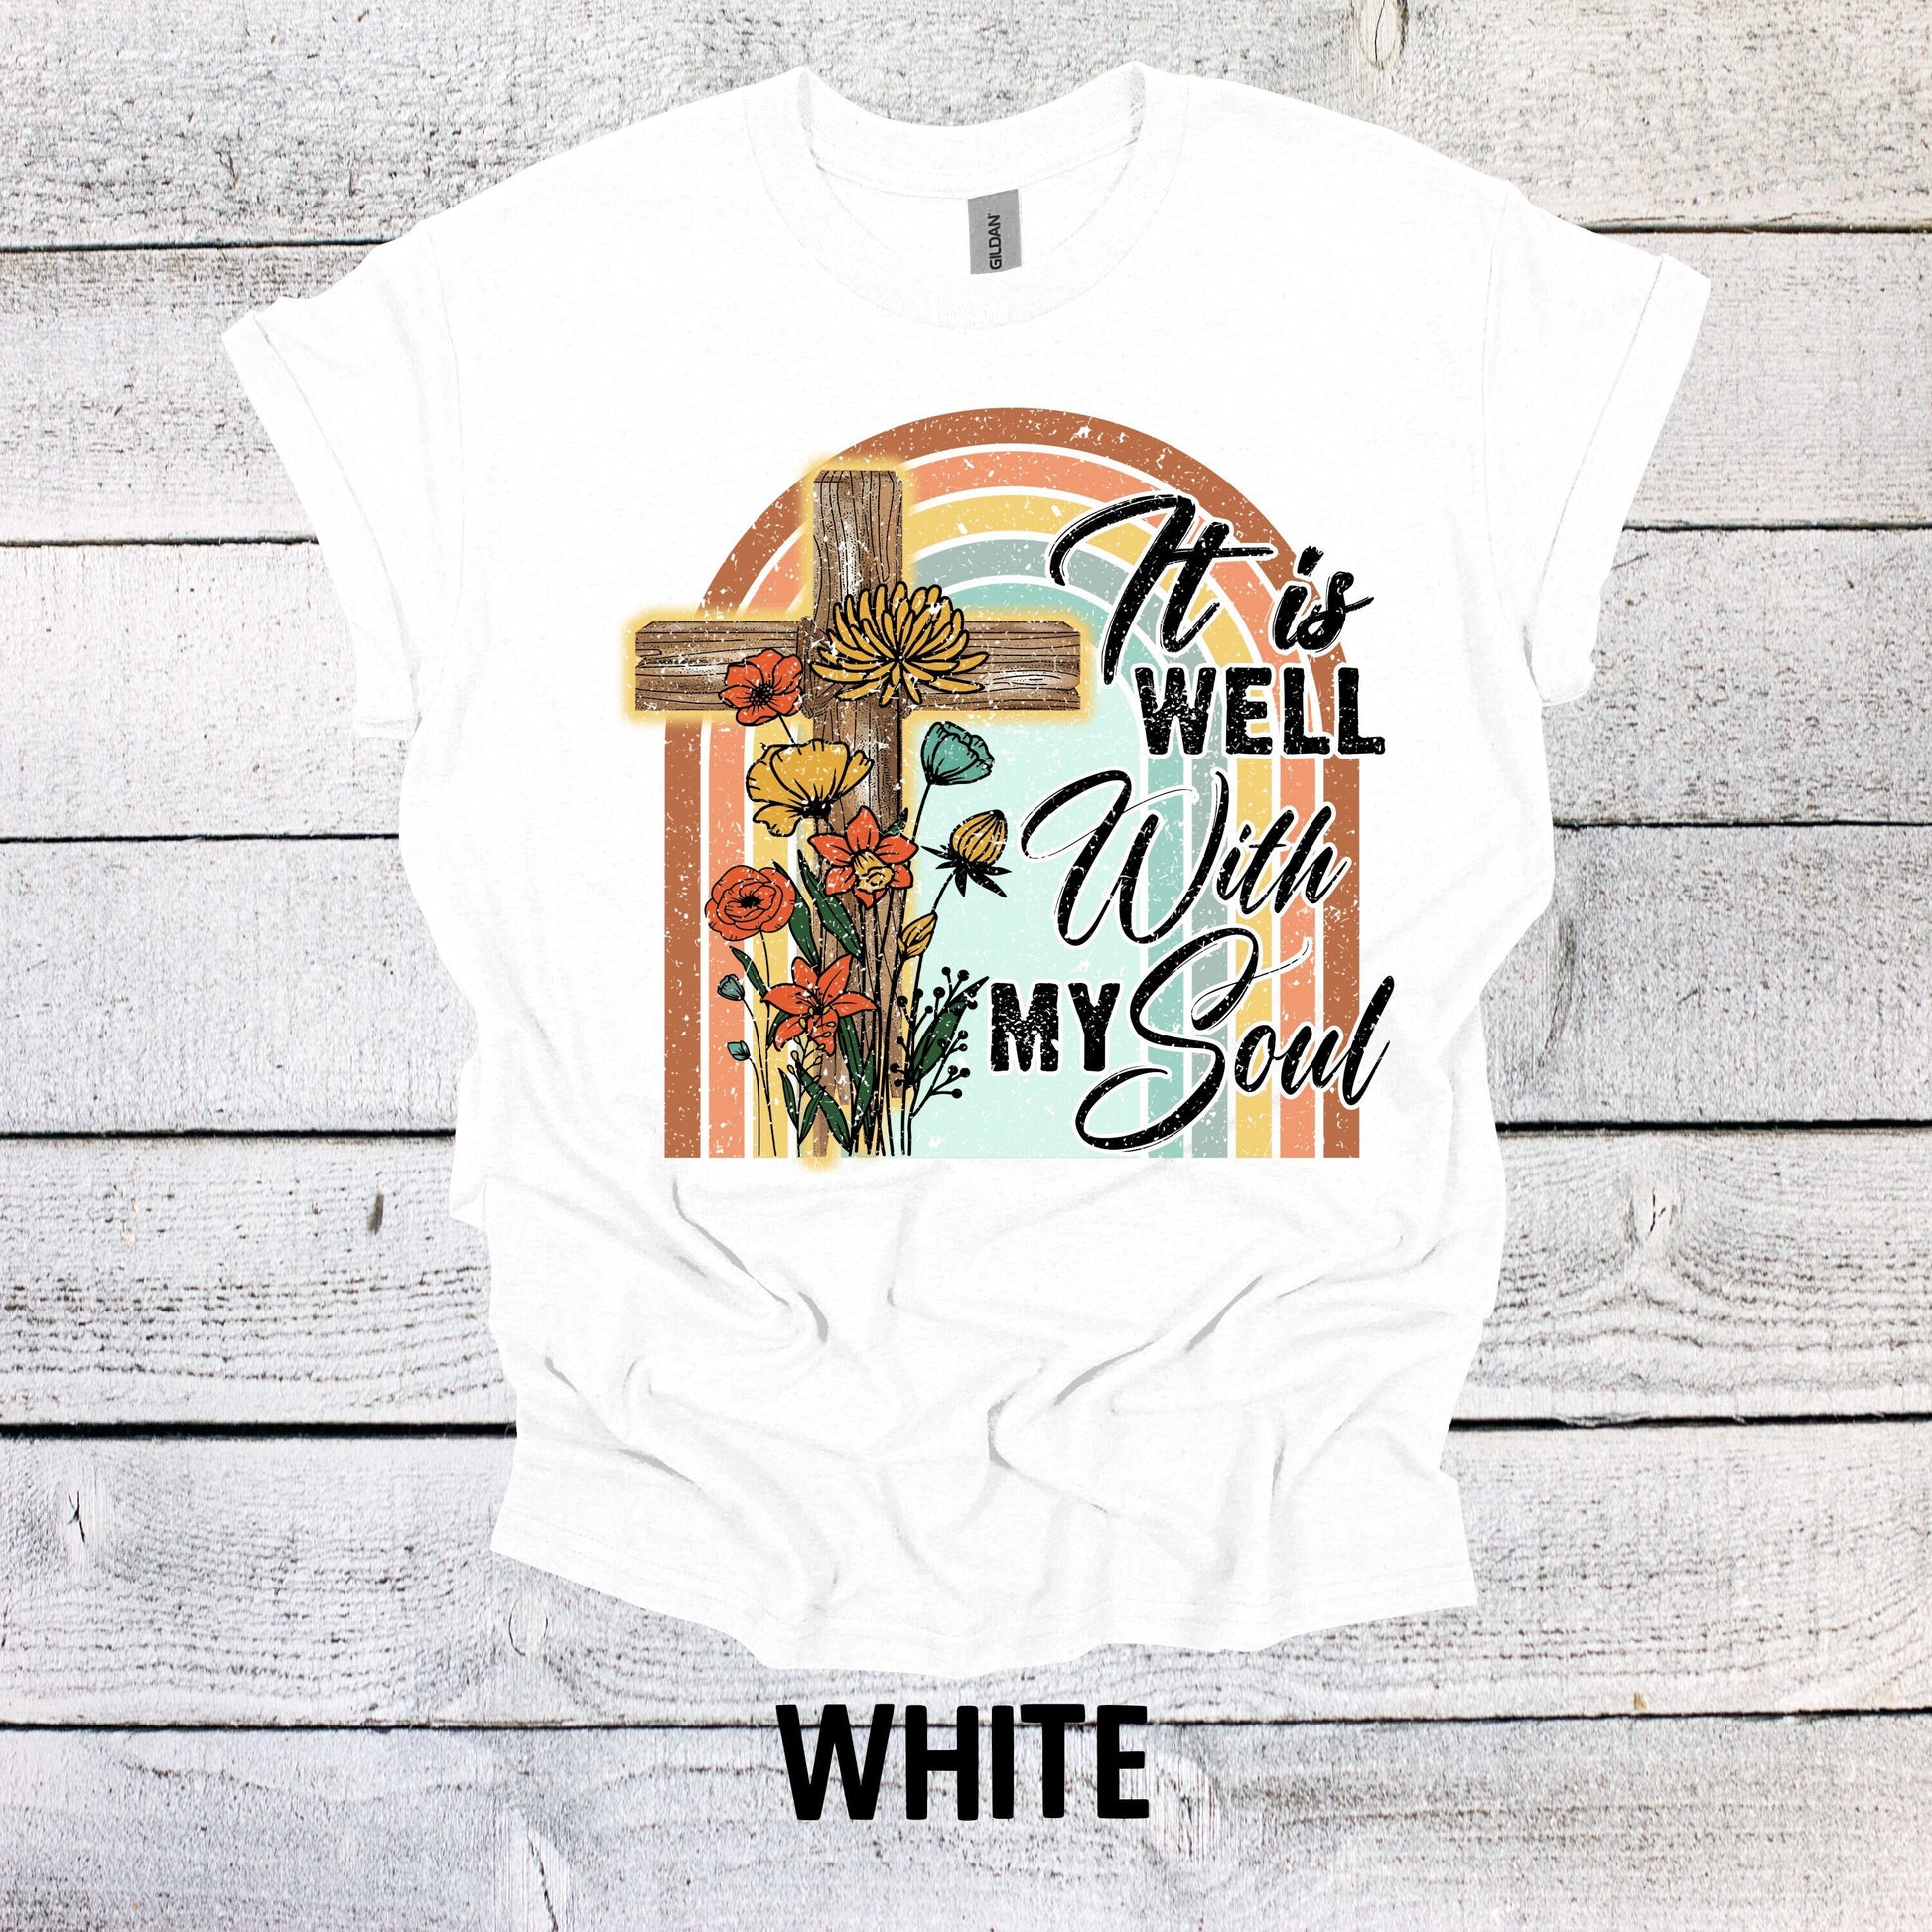 It is Well with my Soul Rainbow Cross Christian Floral Shirt Christian Shirts Religious Shirt Christian Shirt Bible Verse Shirt